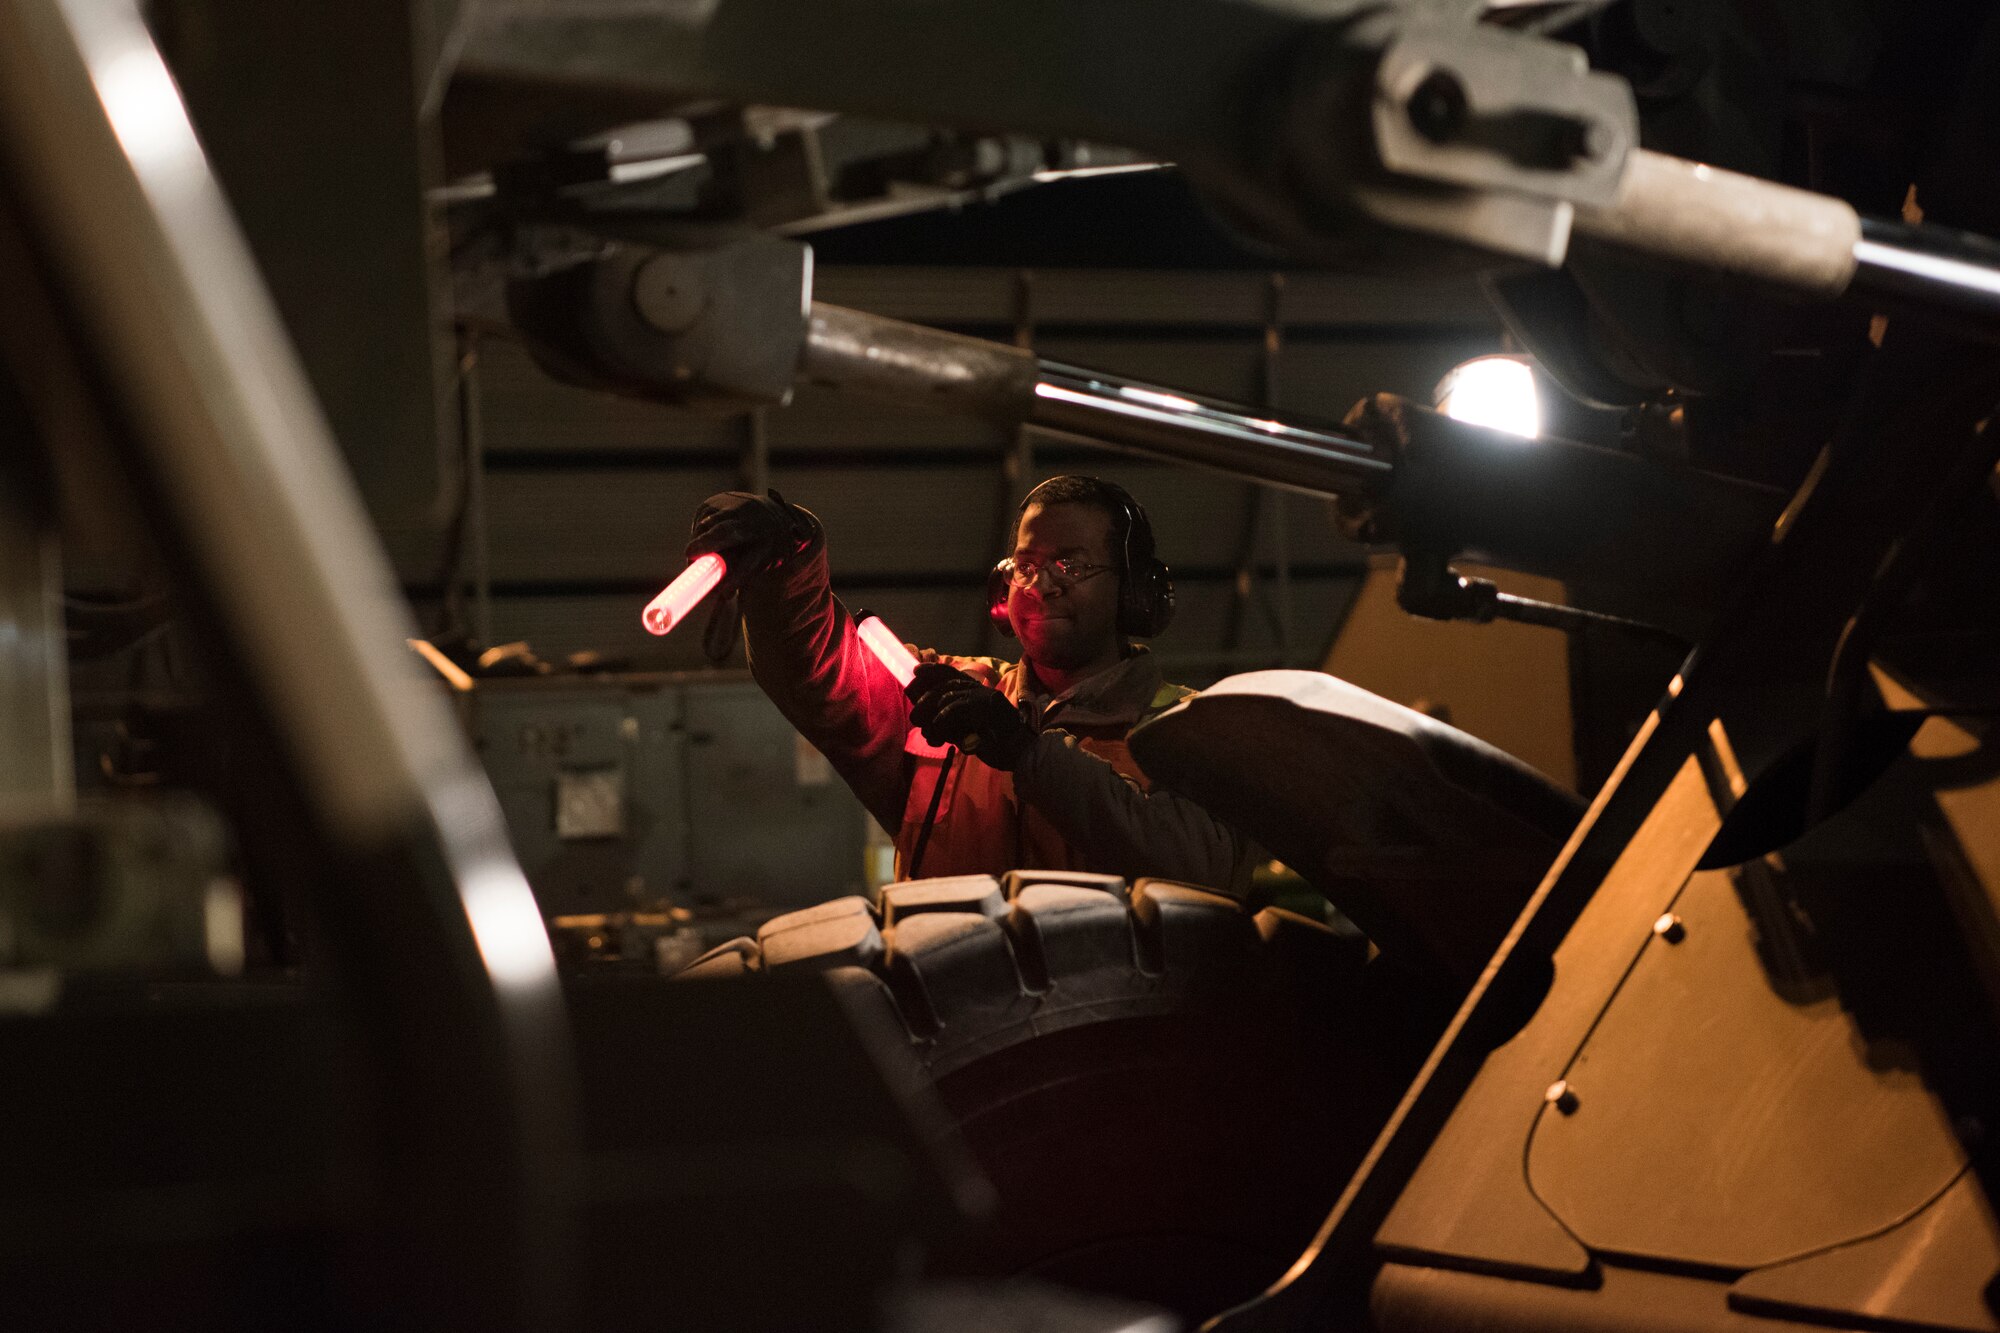 Airman 1st Class Juwan White, 732d Air Mobility Squadron aircraft services technician, uses lights to signal a 10K all-terrain forklift to unload a pallet onto a 60k loader during Polar Force 19-4 at Joint Base Elmendorf-Richardson, Alaska, March 25, 2019. Polar Force is a two-week exercise designed to test JBER’s mission readiness. Exercises like this strengthen and develop the skills service members require when facing adverse situations.